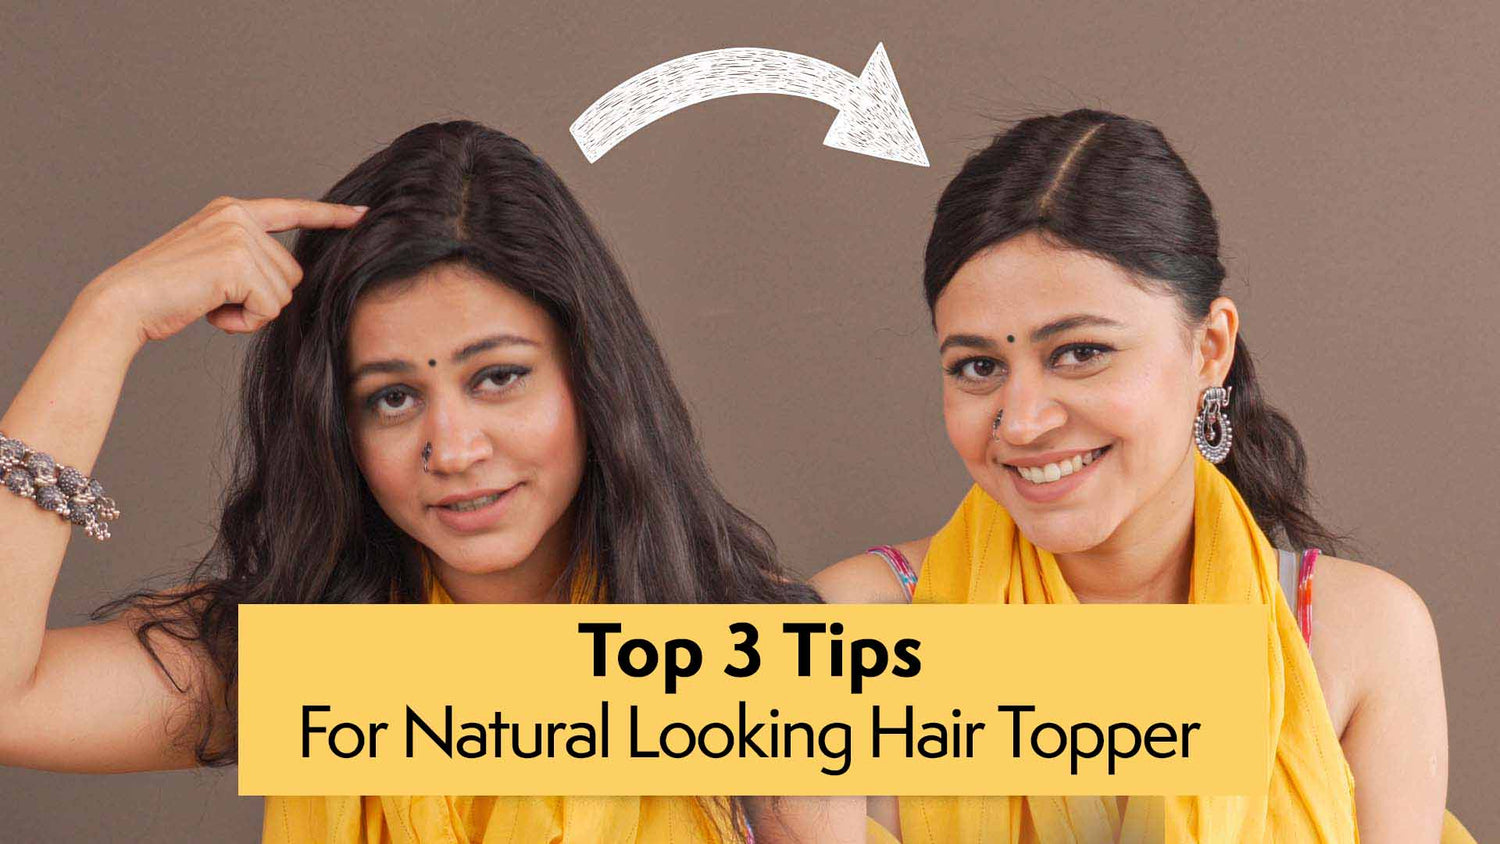 3 Tips for making sure your hair topper looks absolutely natural